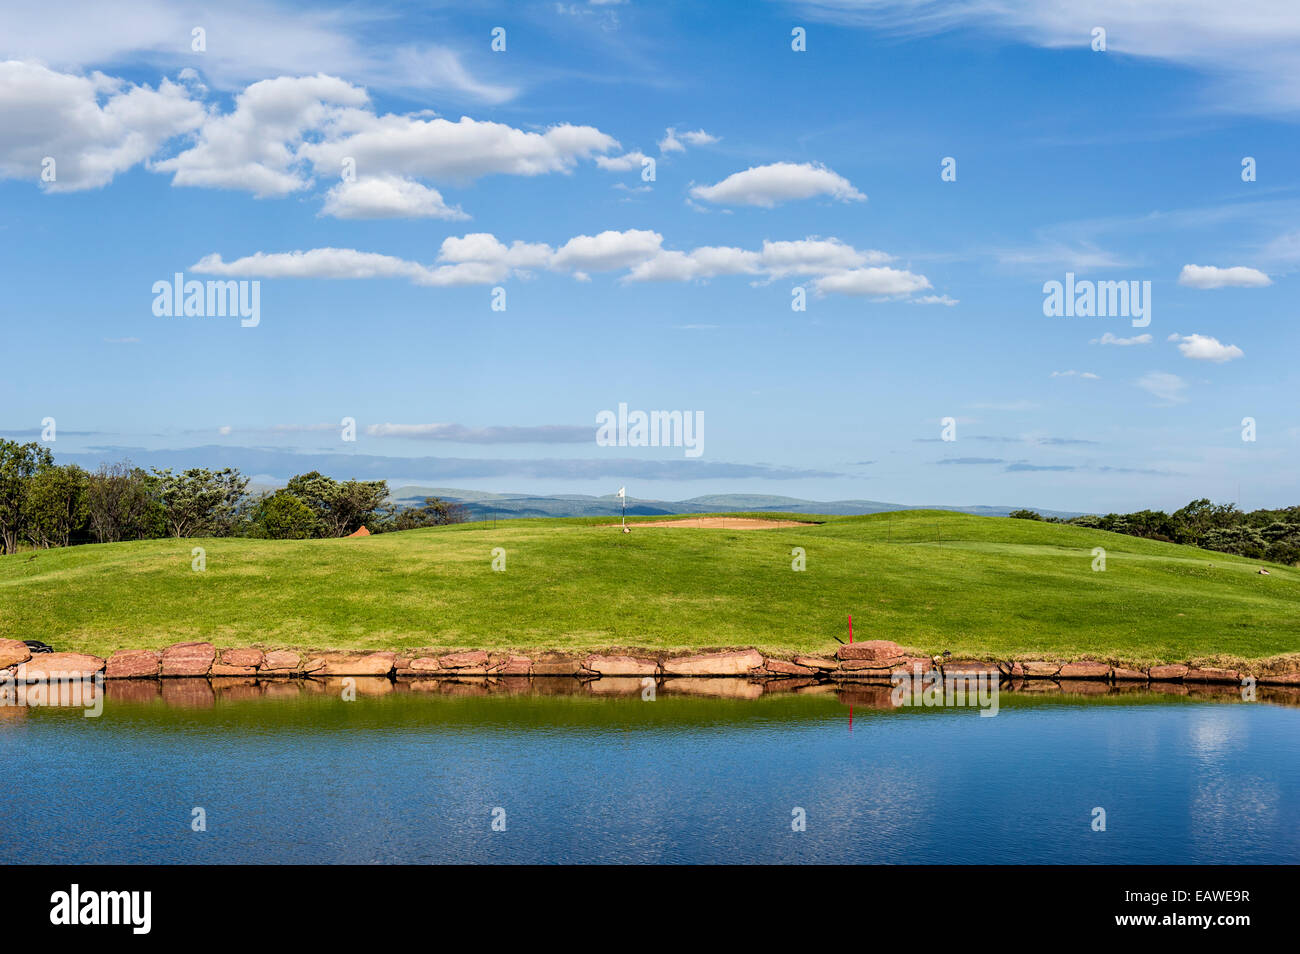 Morning view of a golf fairway and putting green beside a water trap. Stock Photo